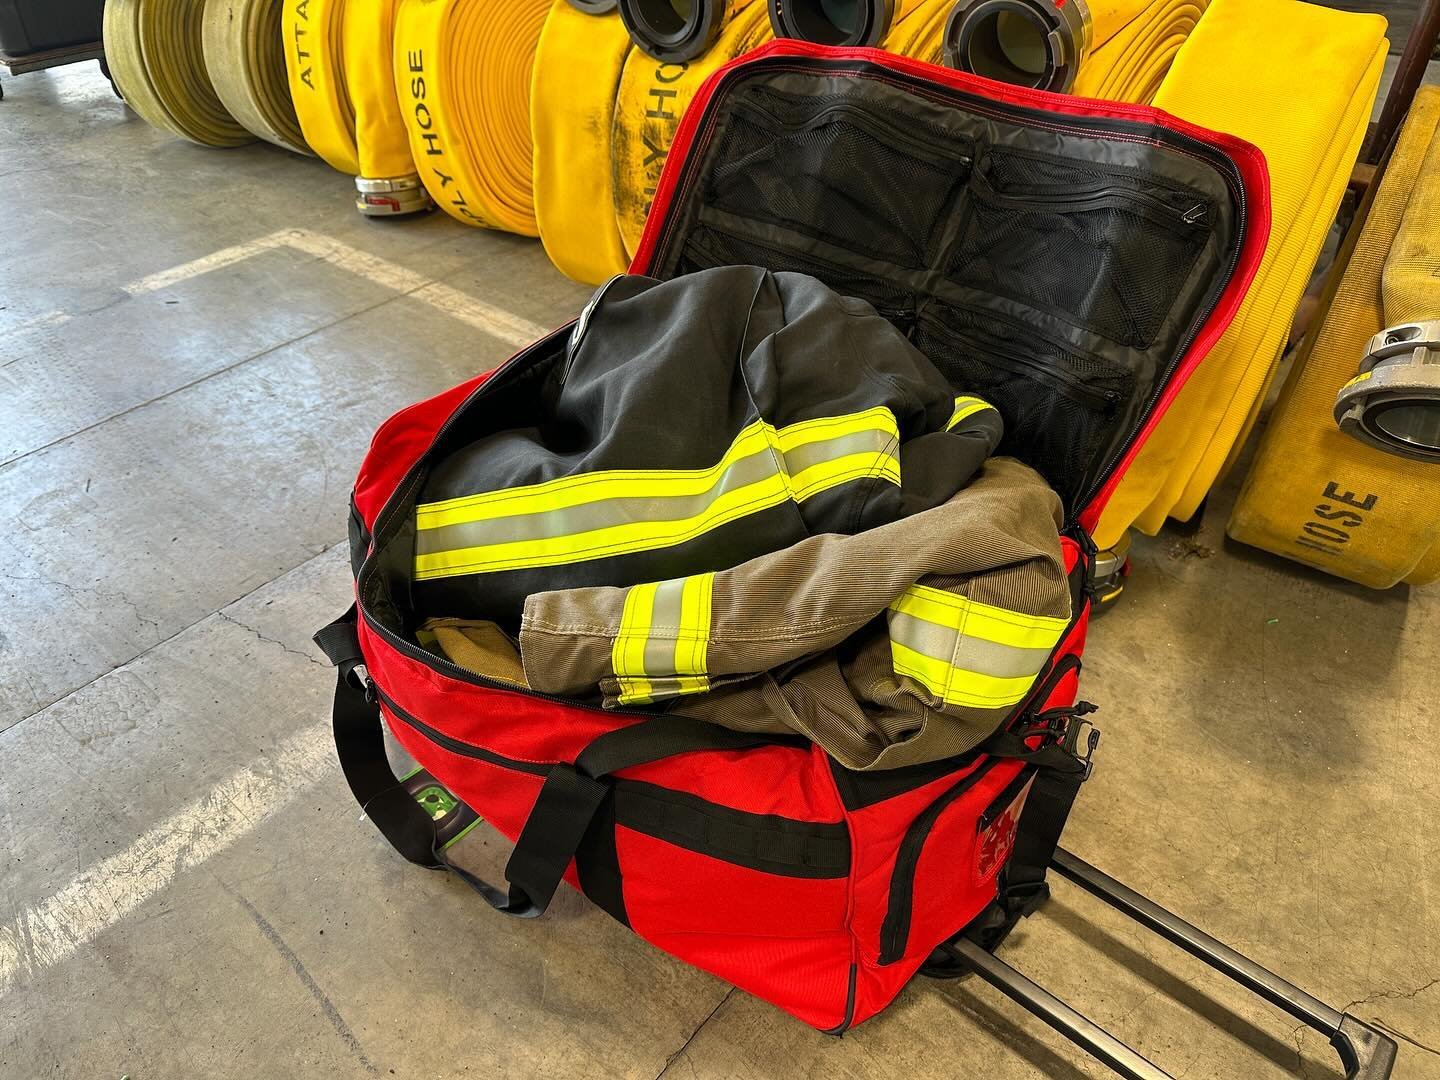 From station to scene, roll with ease! 🔥
&nbsp;
The CrewBoss Rolling Gear Bag is built for firefighters on the move.
&nbsp;
Durable, organized, and ready for action!
&nbsp;
#CrewBossPPE
#FirefighterGear&nbsp;
#GearBag